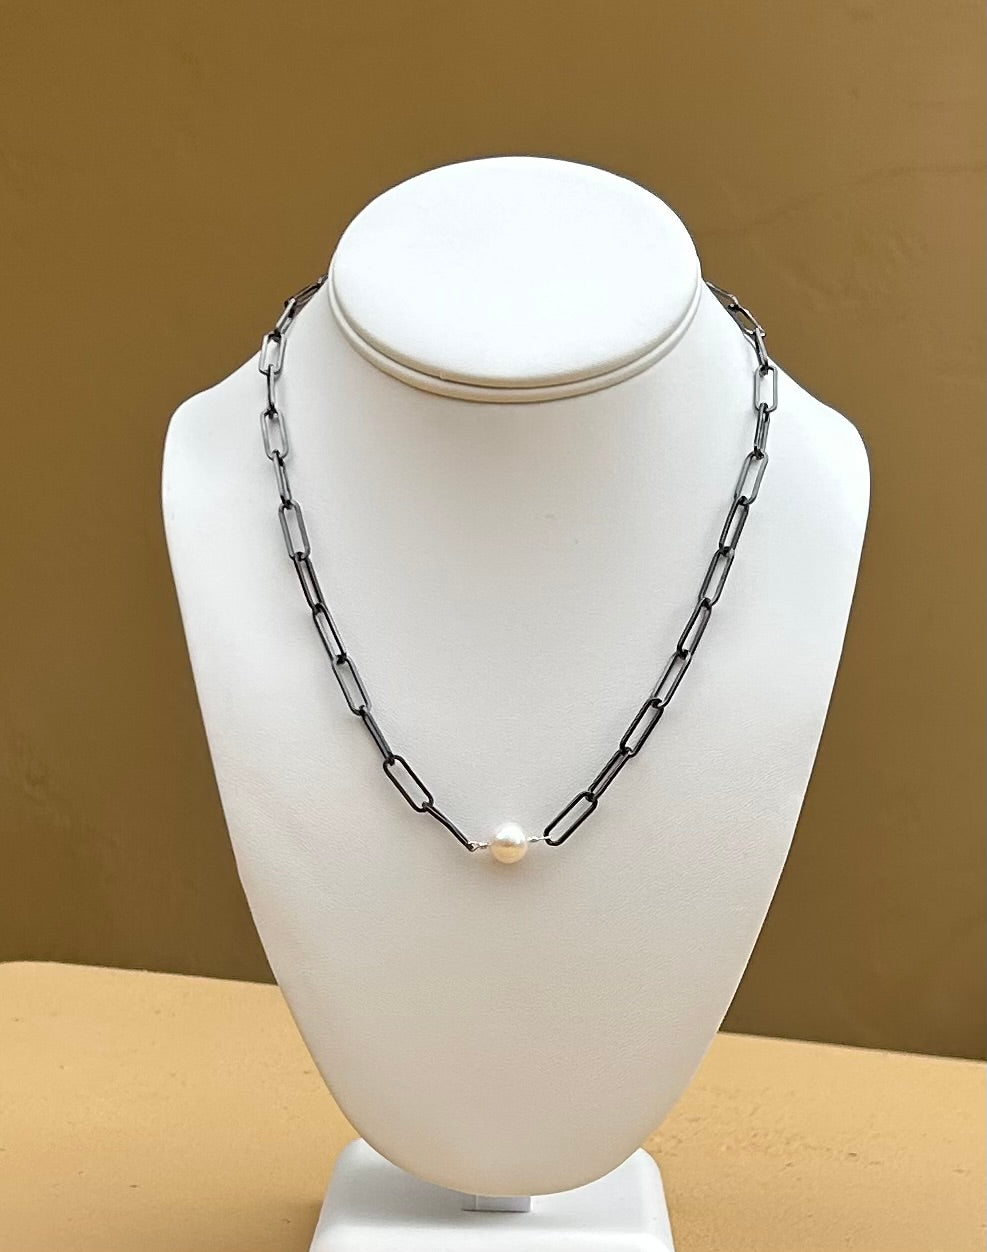 Necklace - Black paper clip necklace with a large (9mm) white round pearl